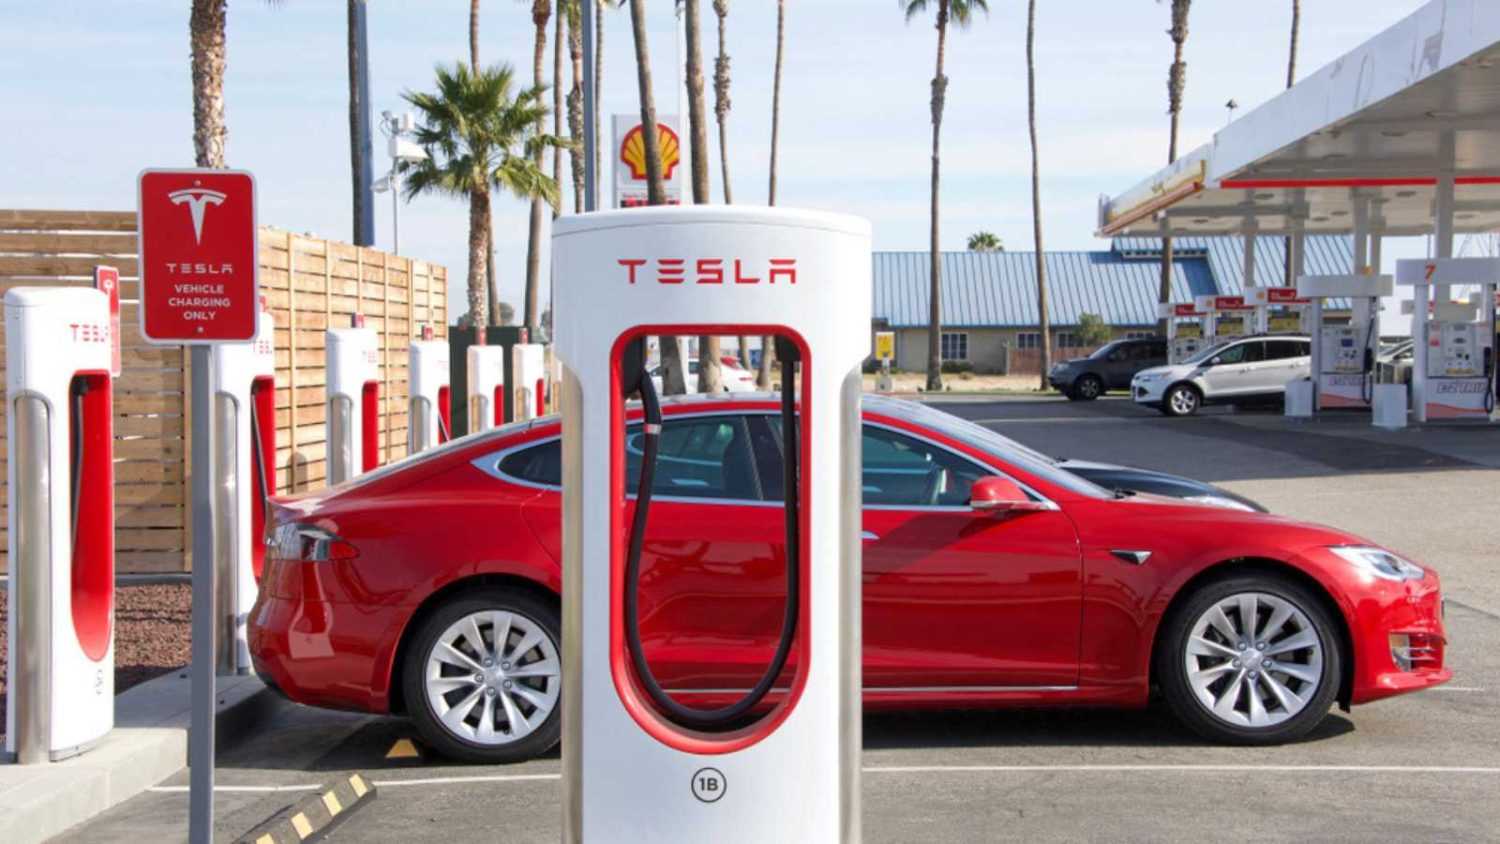 Bakersfield, CA - December 18, 2017: Tesla Super Charging station on Stockdale Hwy and the 5 fwy. Tesla Supercharger stations allow Tesla cars to be fast-charged at the network within an hour.